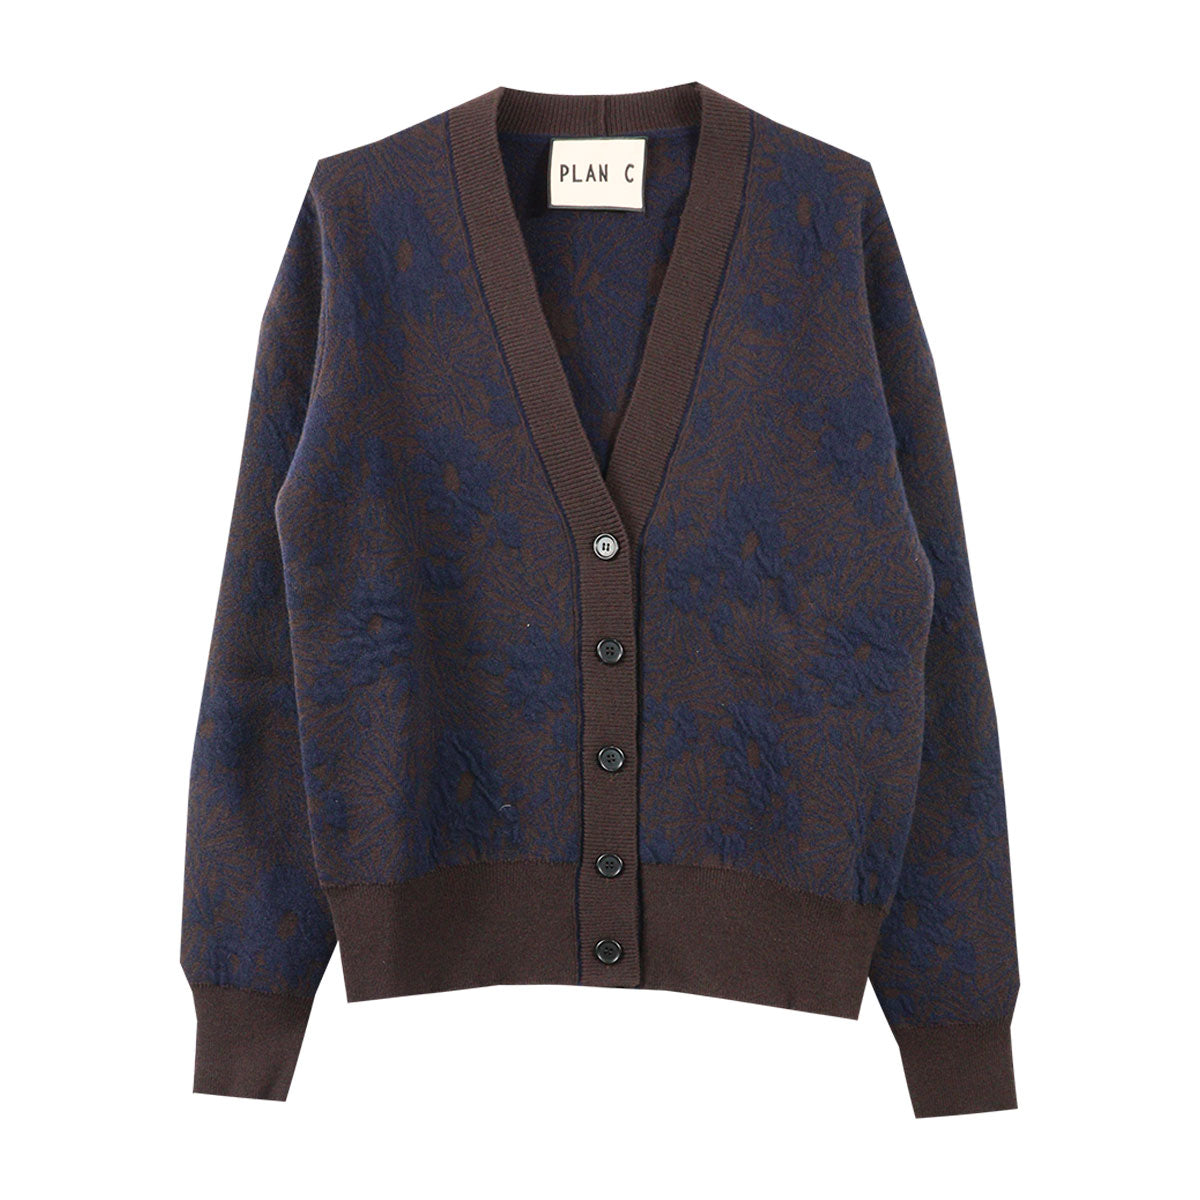 L/S FLOWER JAQUARD CARDIGAN - Why are you here?